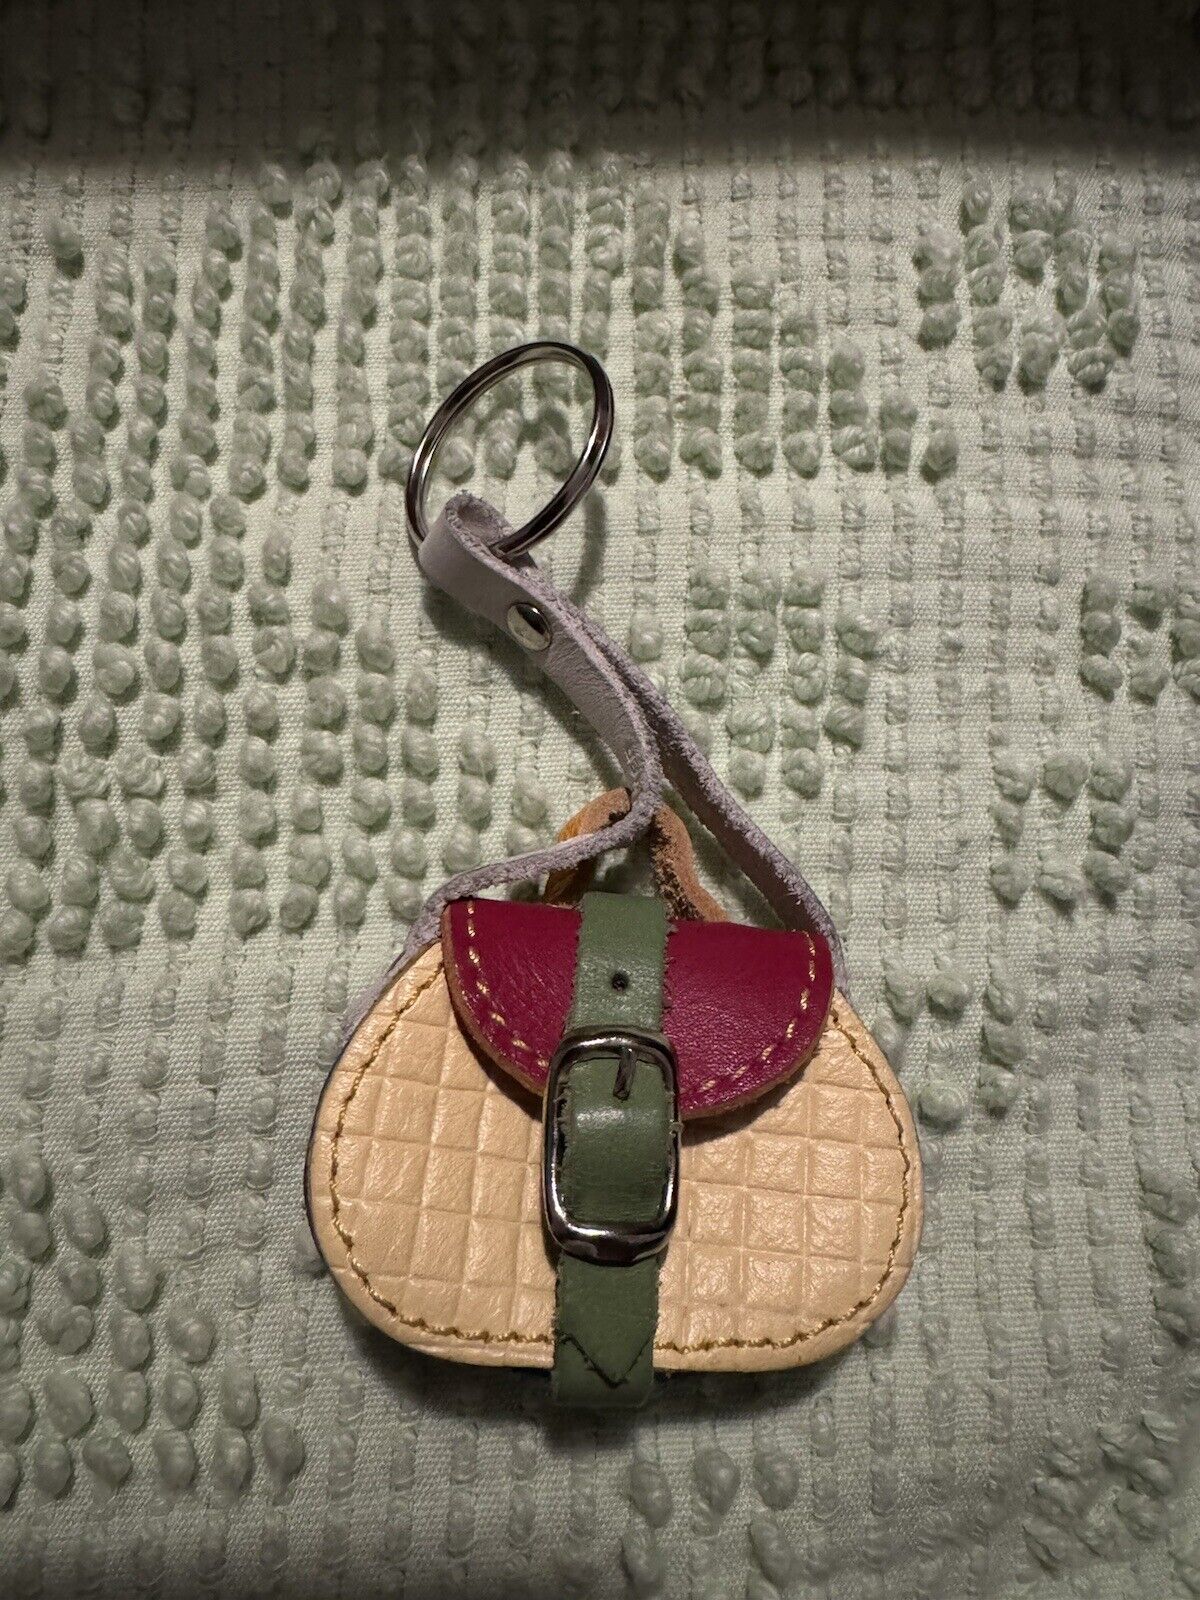 Vintage Key Chain miniature Leather Bag Made in Italy